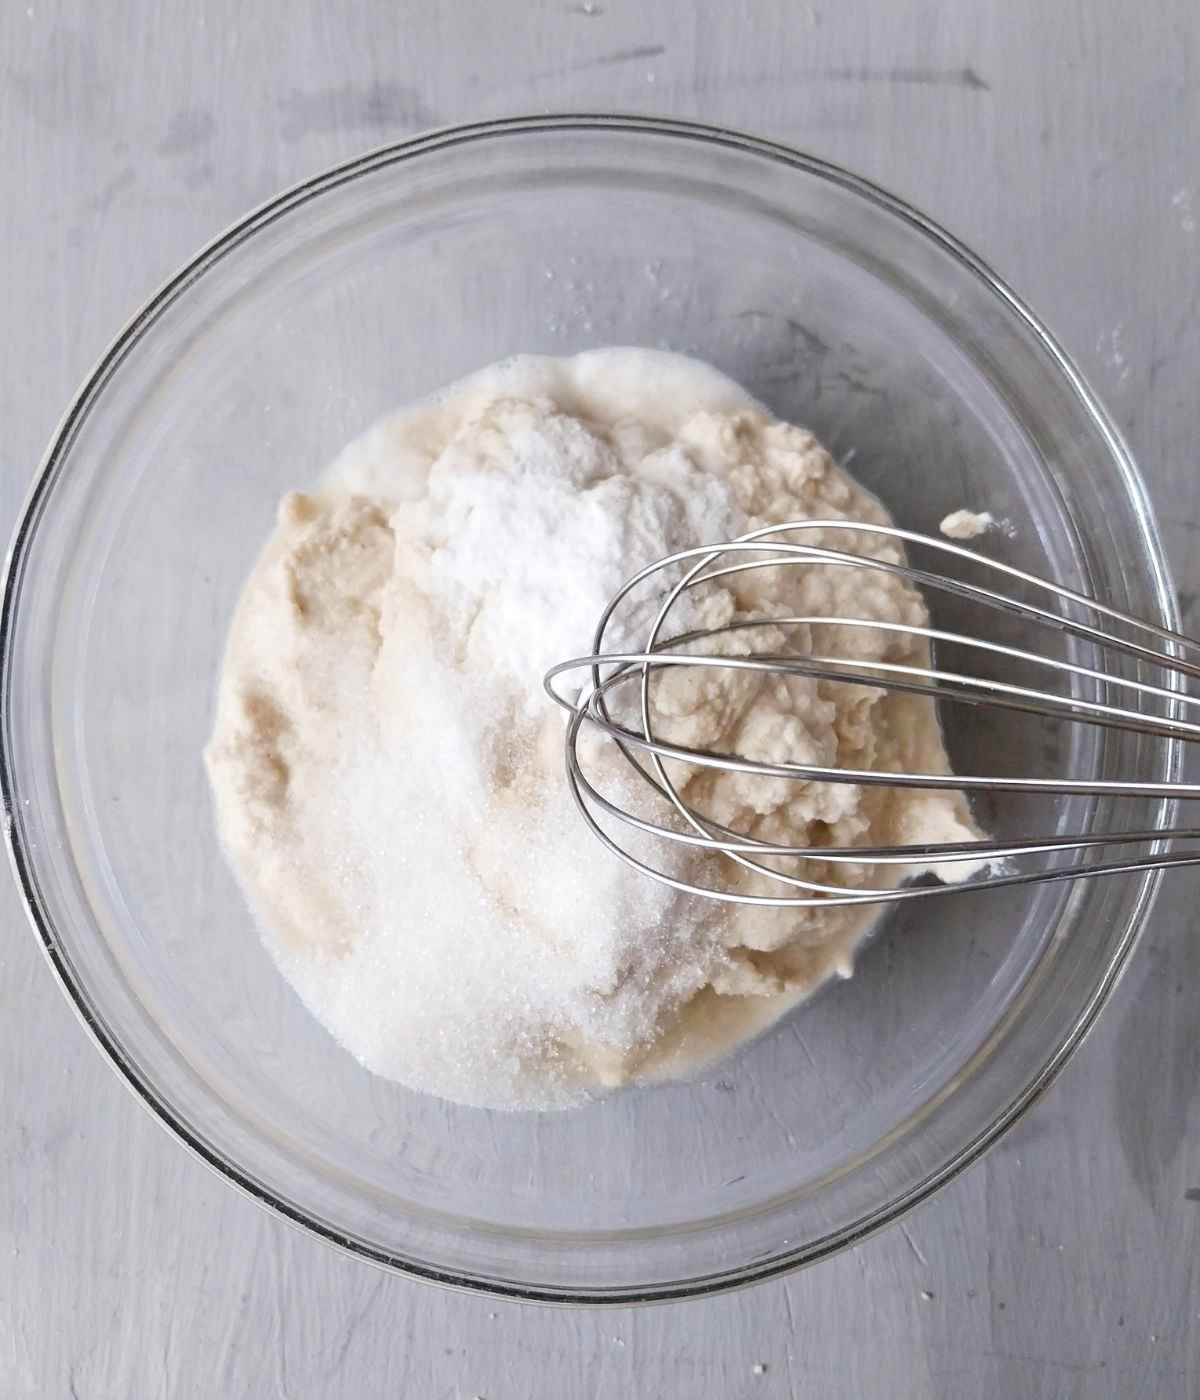 Ingredients in a glass bowl with a whisk.